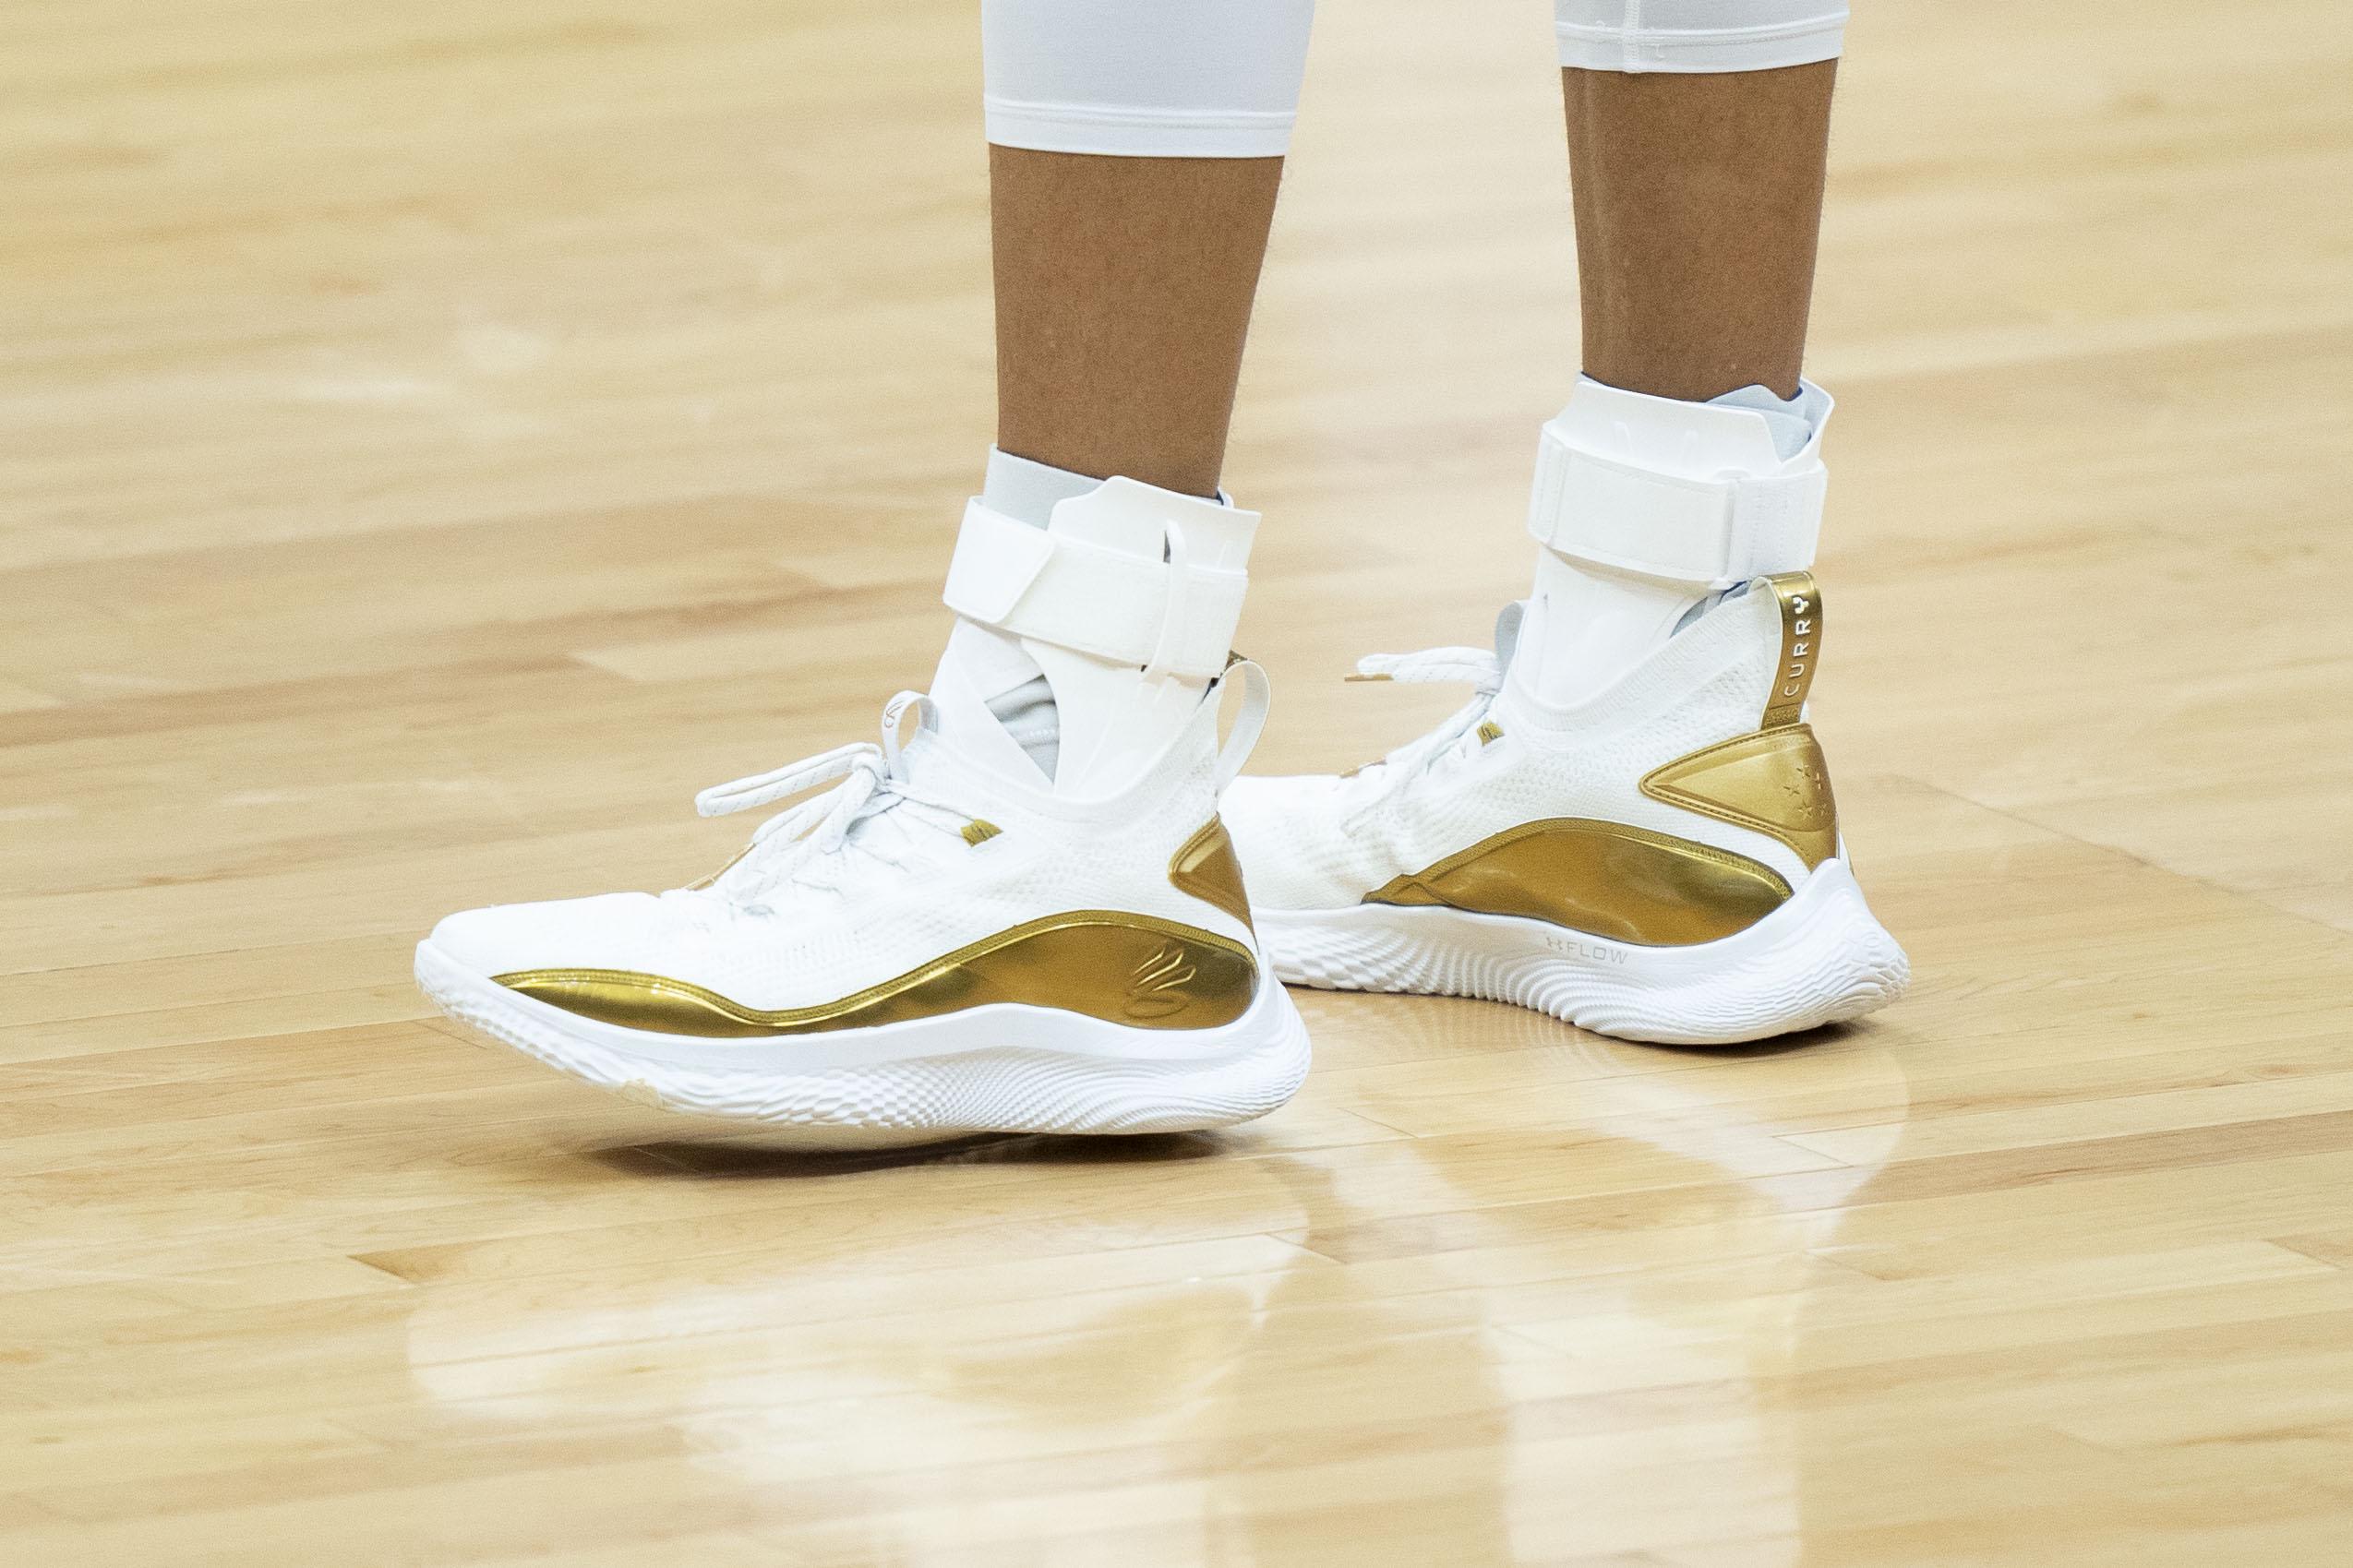 Stephen Curry's white and gold Under Armour sneakers.